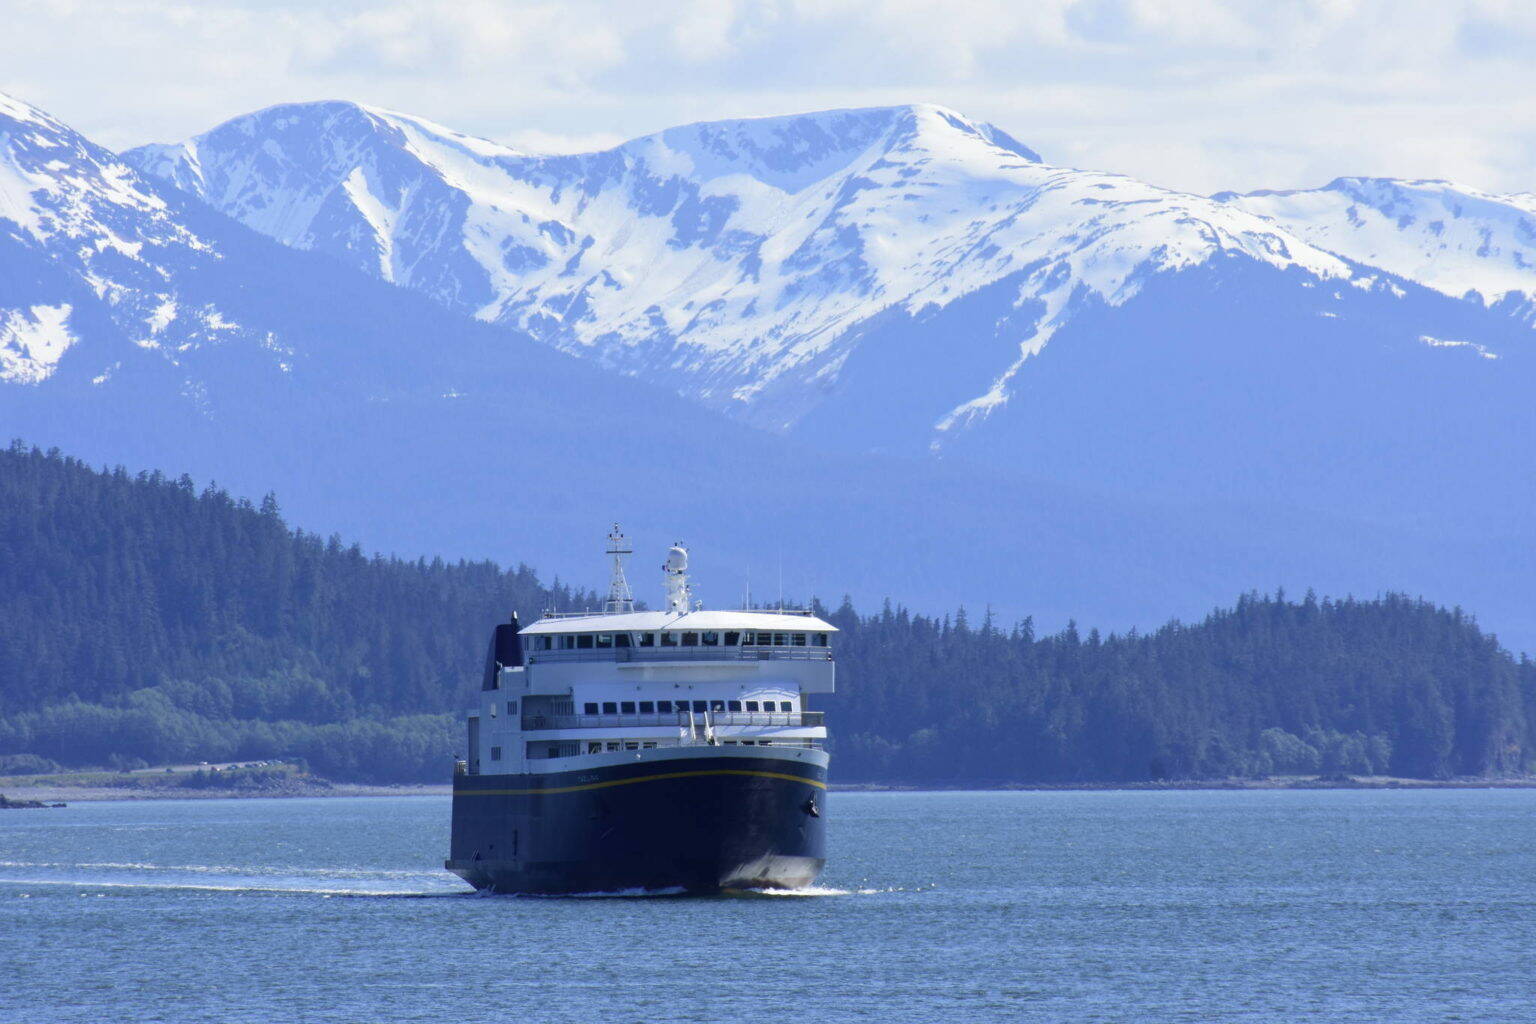 The MV Tazlina arrives in Juneau in this May 2020 photo. Federal relief dollars may be coming to the state to aide the Alaska Marine Highway System, but the unions that run the ships say workers are leaving the state. (Peter Segall / Juneau Empire file)